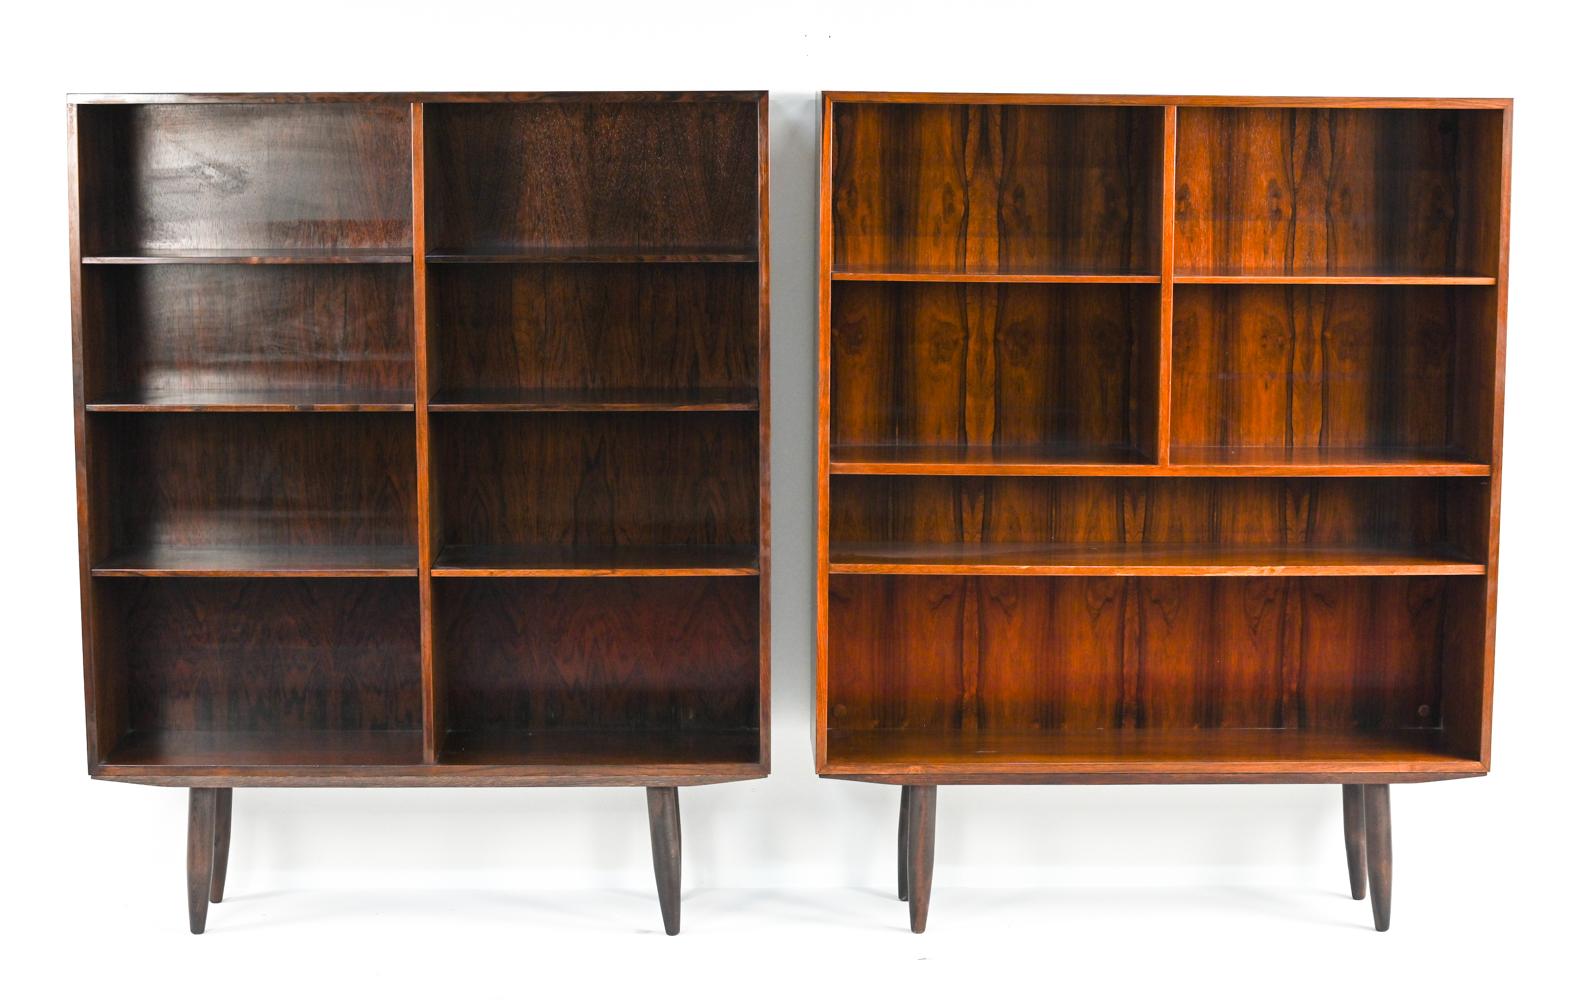 Two Scandinavian mid-century modern bookcases on tapered legs designed by Gunni Omann for Omann Jun, 1960's. Both in rosewood with adjustable shelf height positions. These bookcases have slightly different shelf configurations and finishes, but are